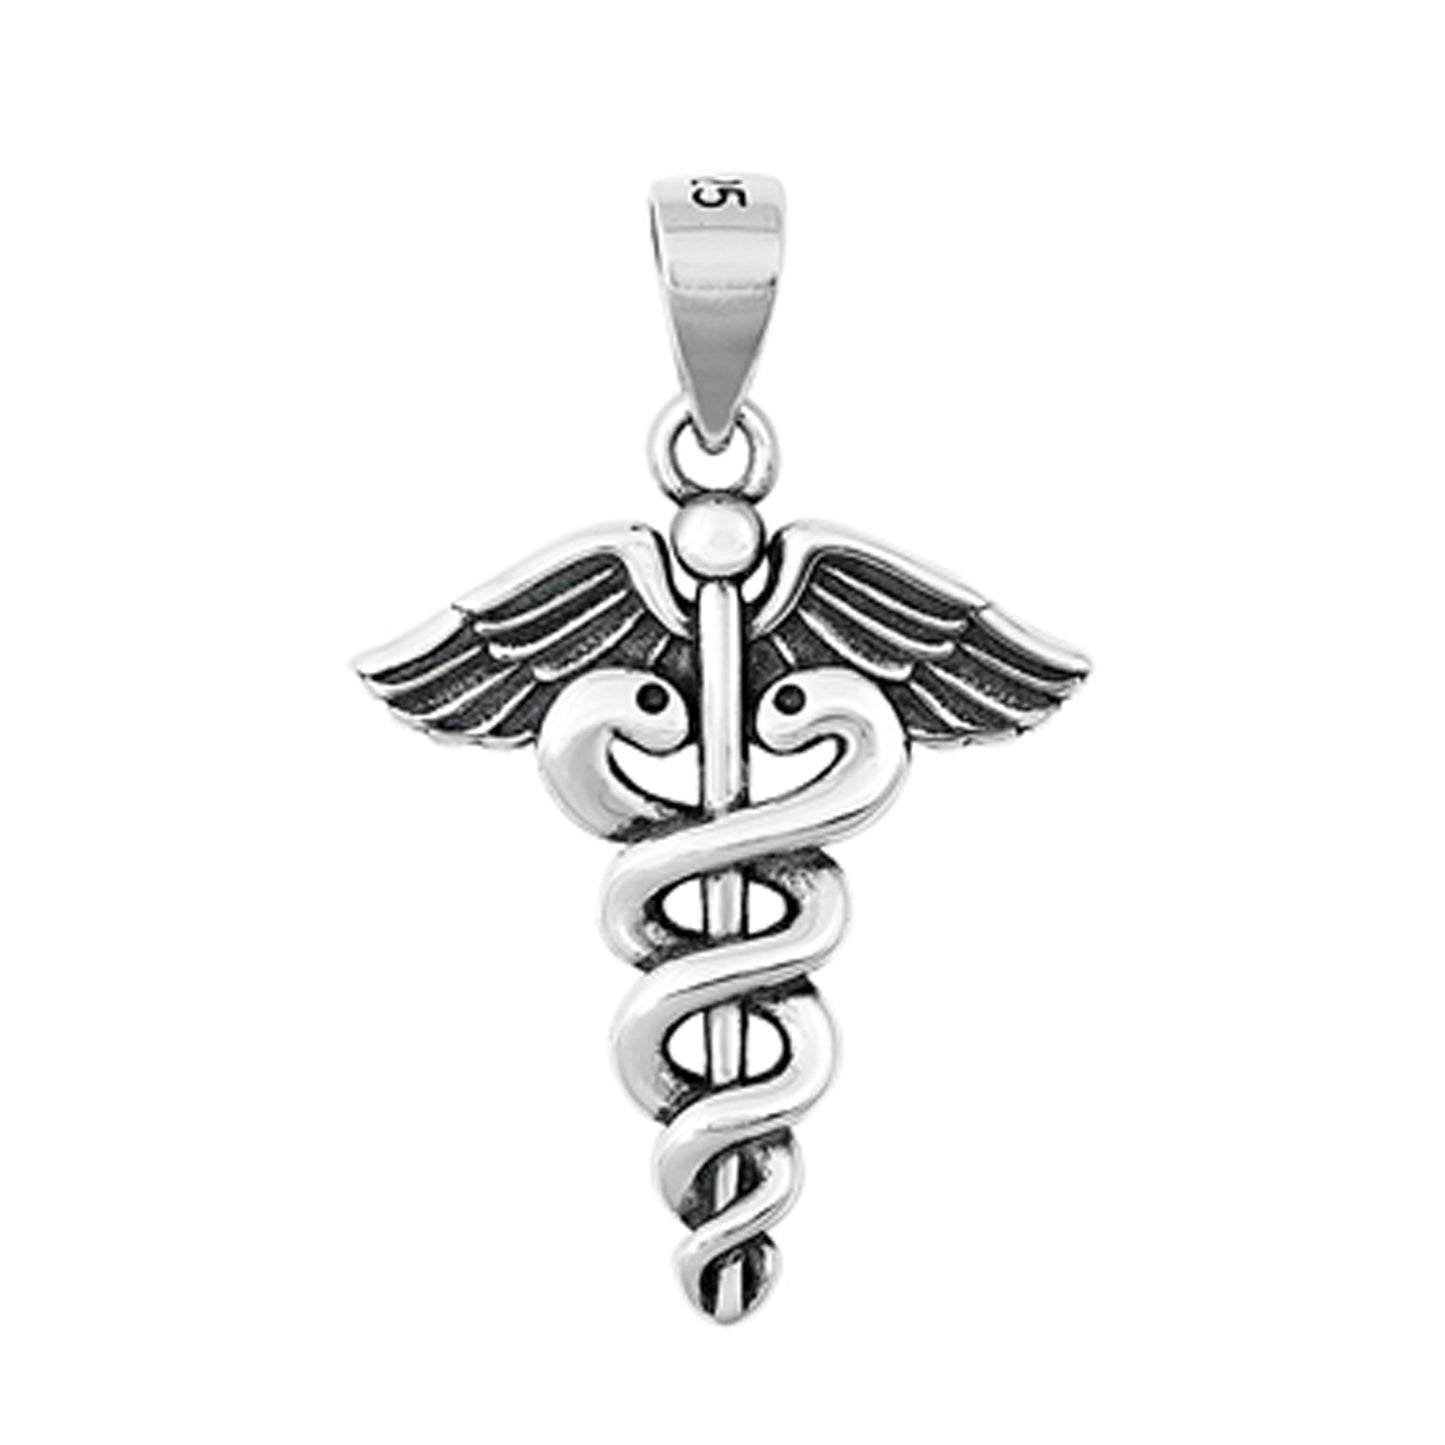 Medical Caduceus Pendant in Sterling Silver